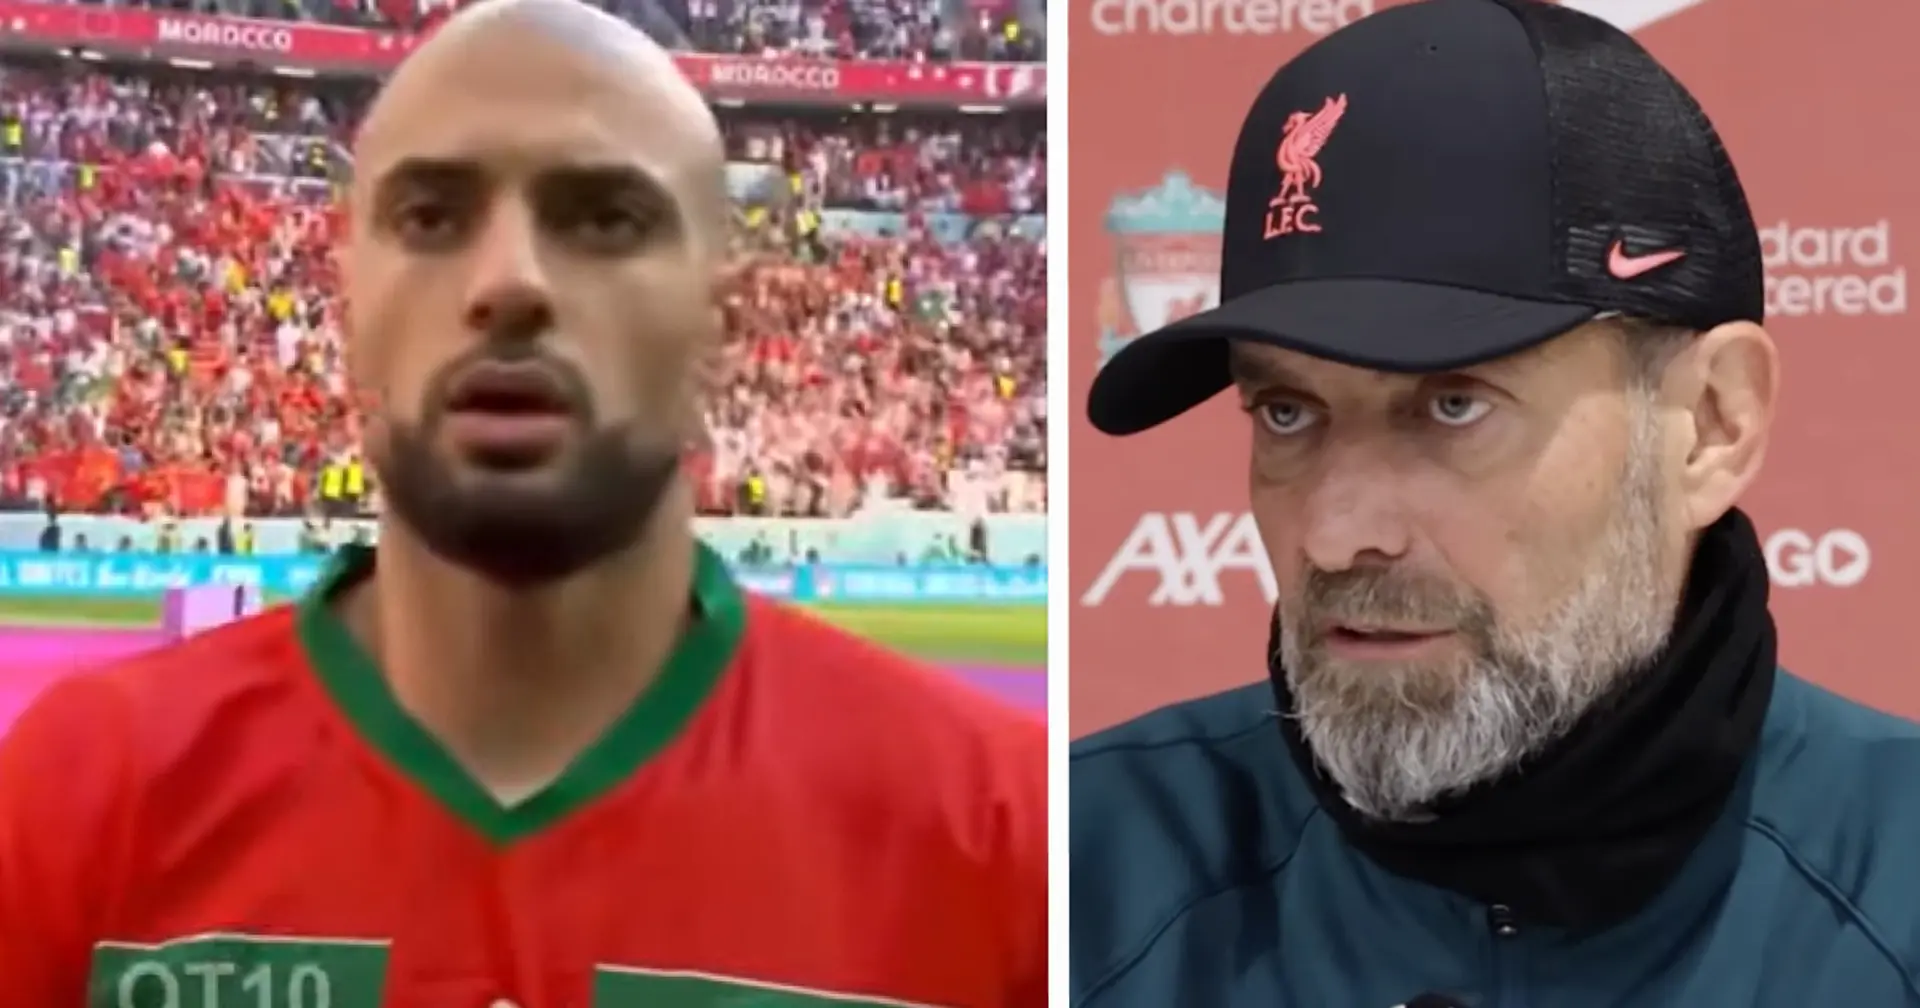 Liverpool declare interest in Morocco World Cup midfielder who earns £1.5m per year (reliability: 3 stars)